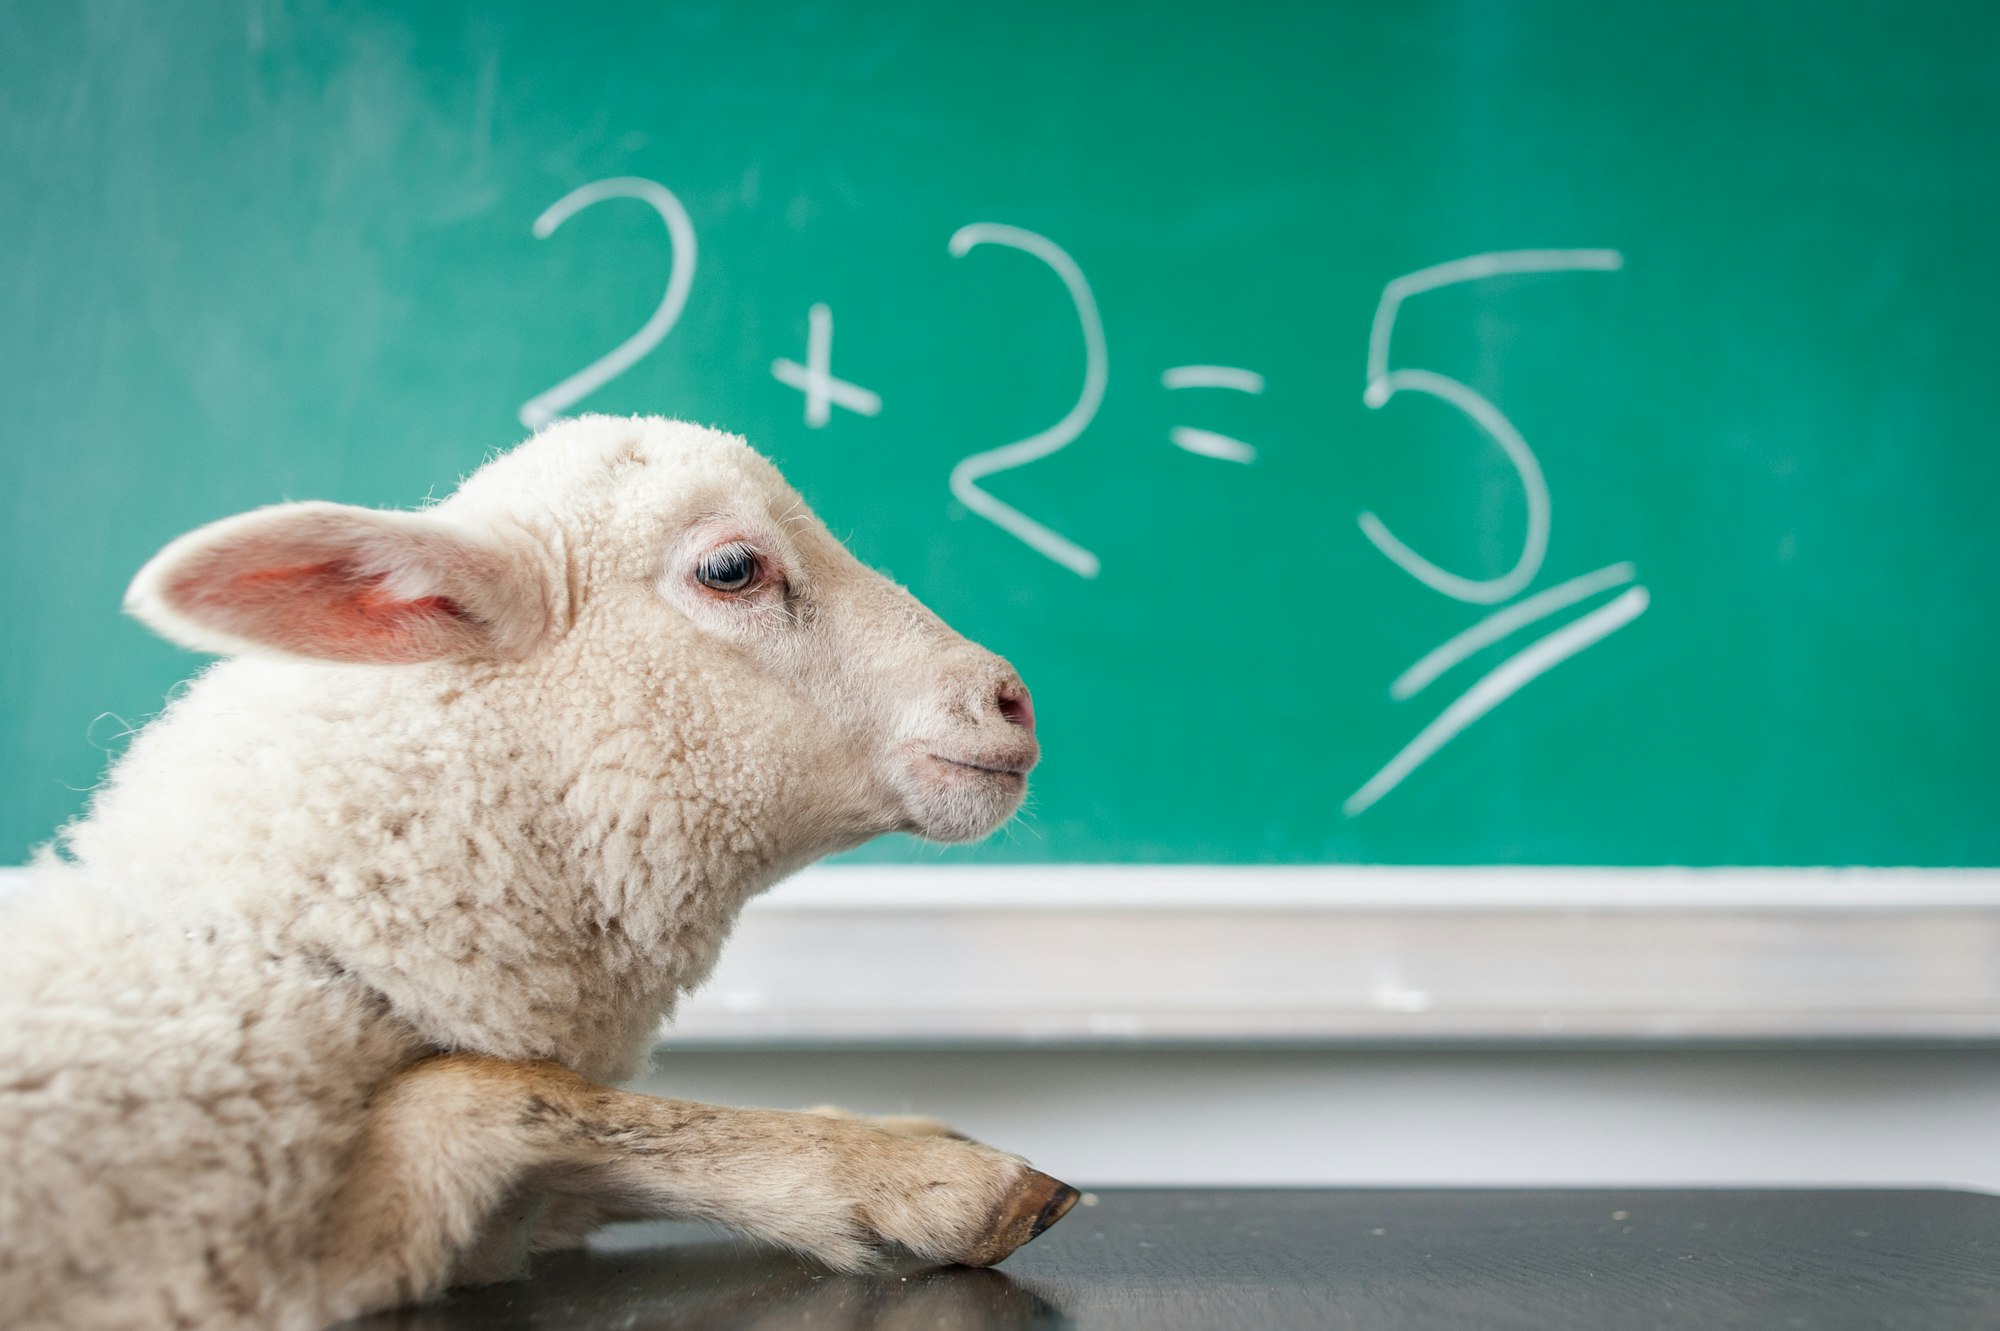 Sheep and chalkboard that says 2+2 = 5